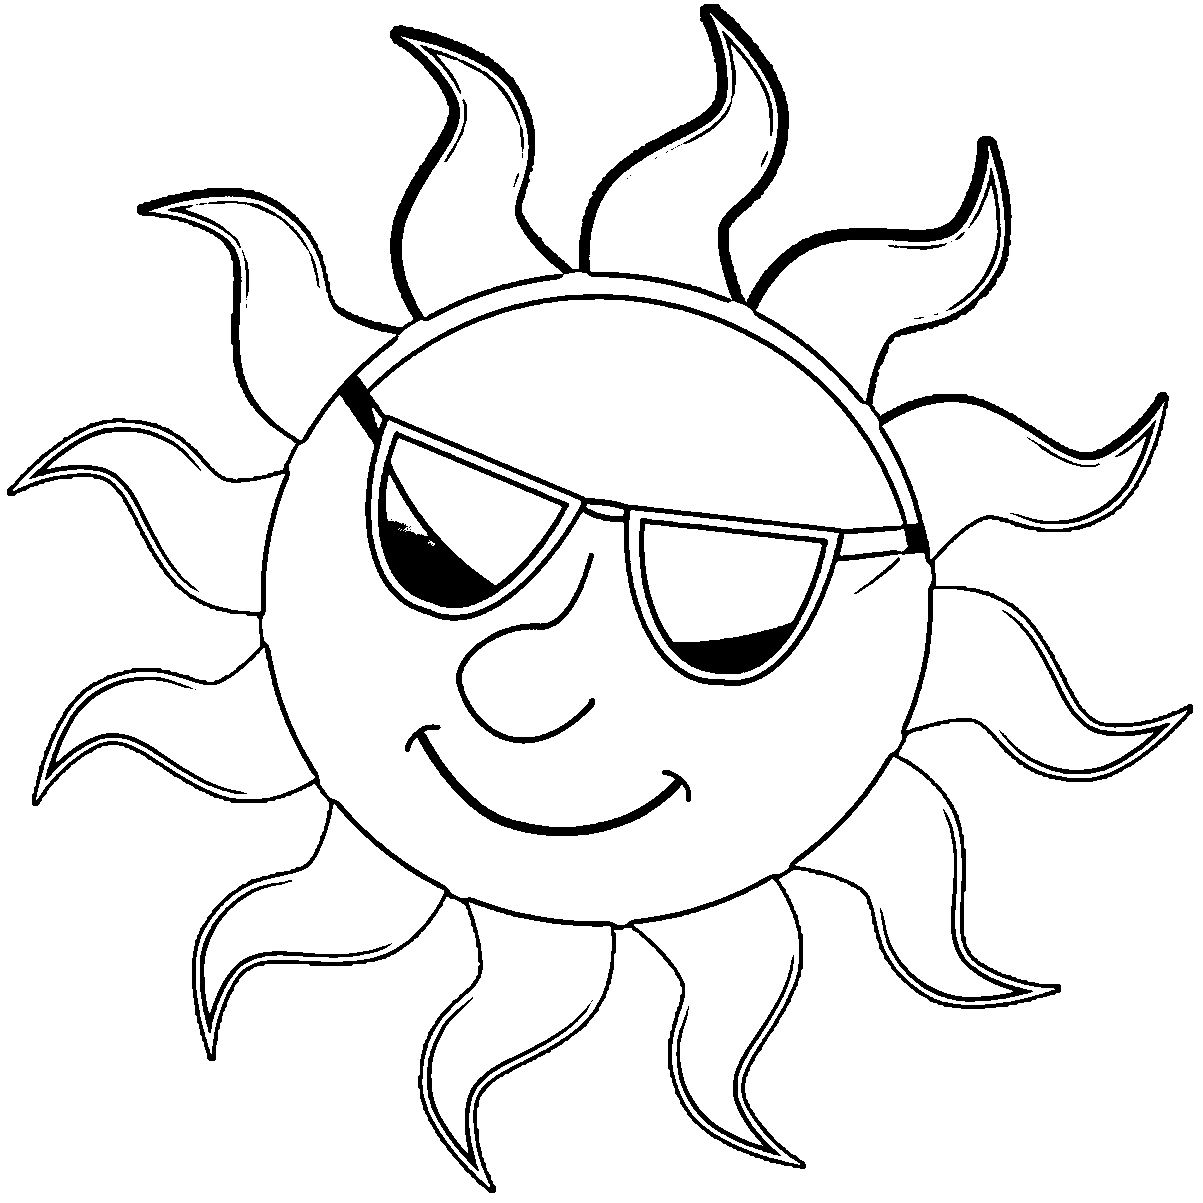 daylight-savings-coloring-pages-clip-art-library